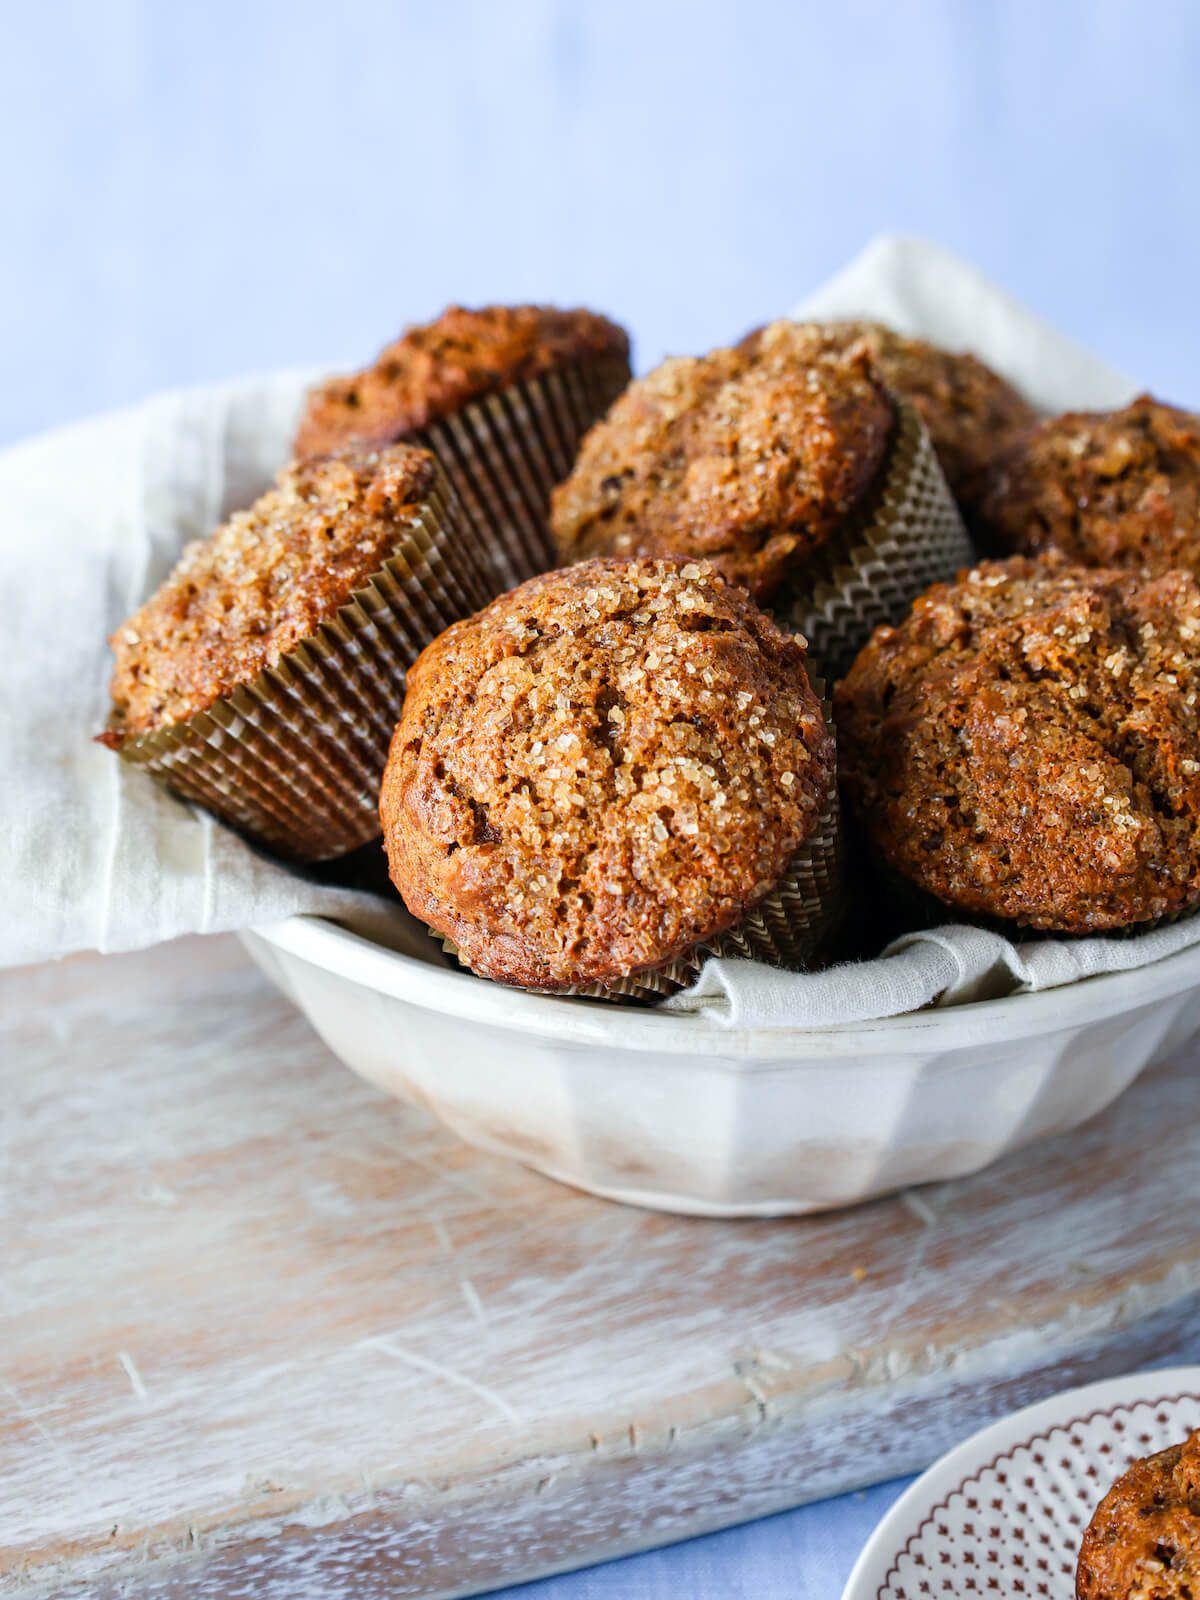 Bran muffins in an ironstone white bowl.